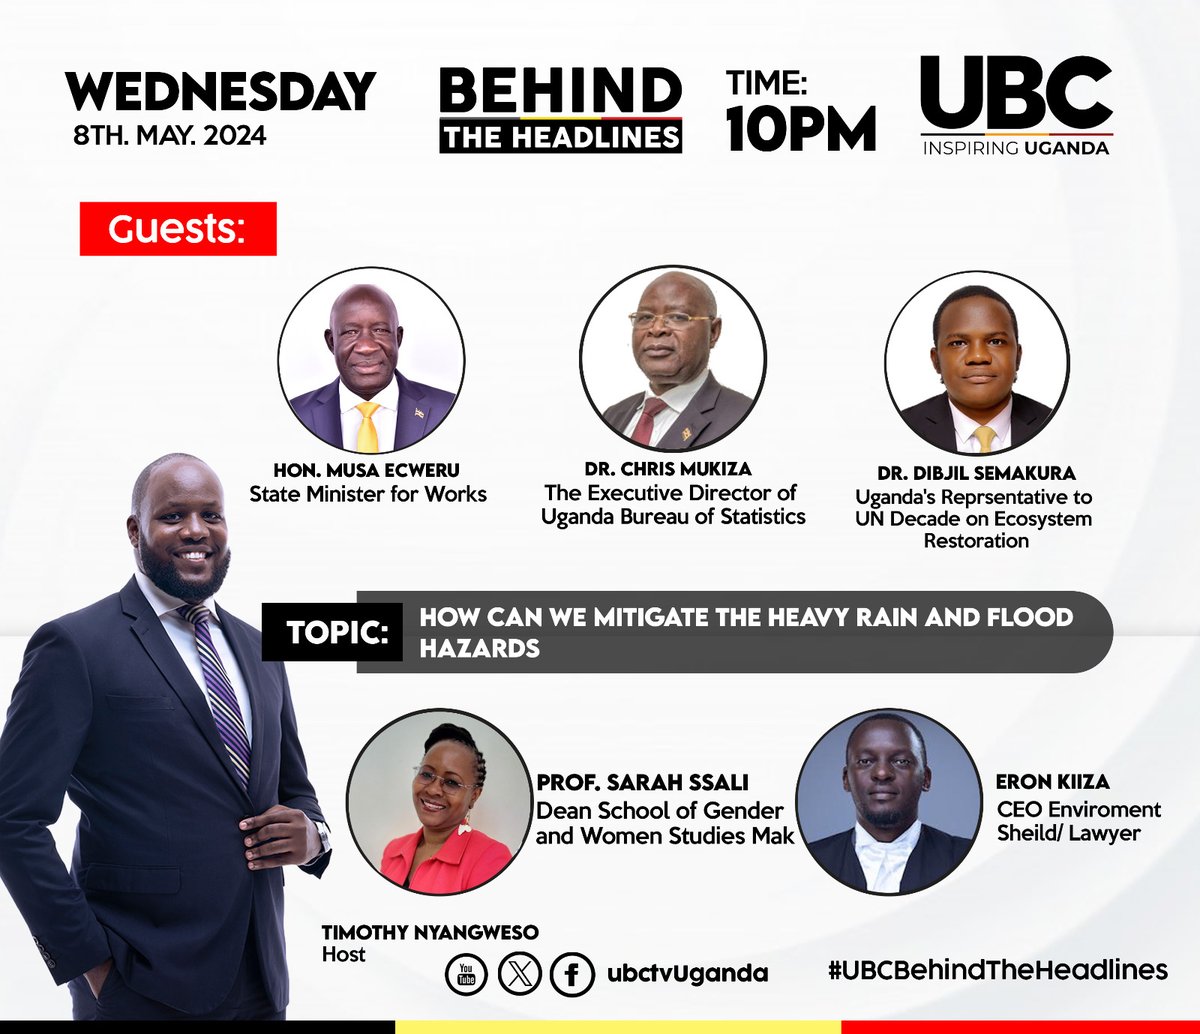 Tonight at 10 PM! Join @TimNyangweso and the panelists discussing the impacts, aftereffects and strategies for mitigation of the heavy rains and flood hazards, live on UBC's 'Behind the Headlines.' Tune in! | #UBCBehindtheheadlines